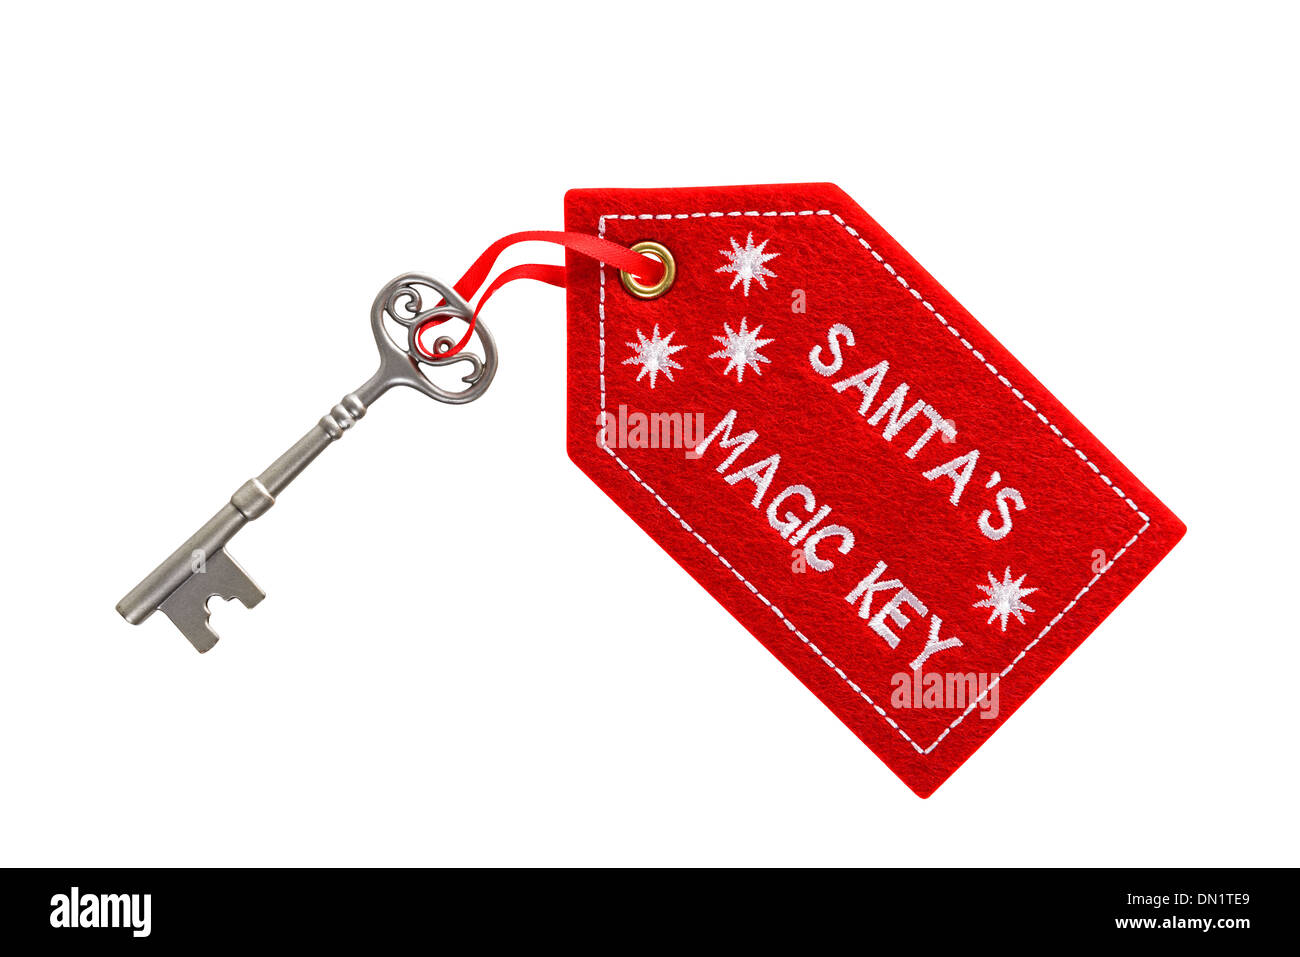 Santa's magic key isolated on a white background with clipping path. Stock Photo